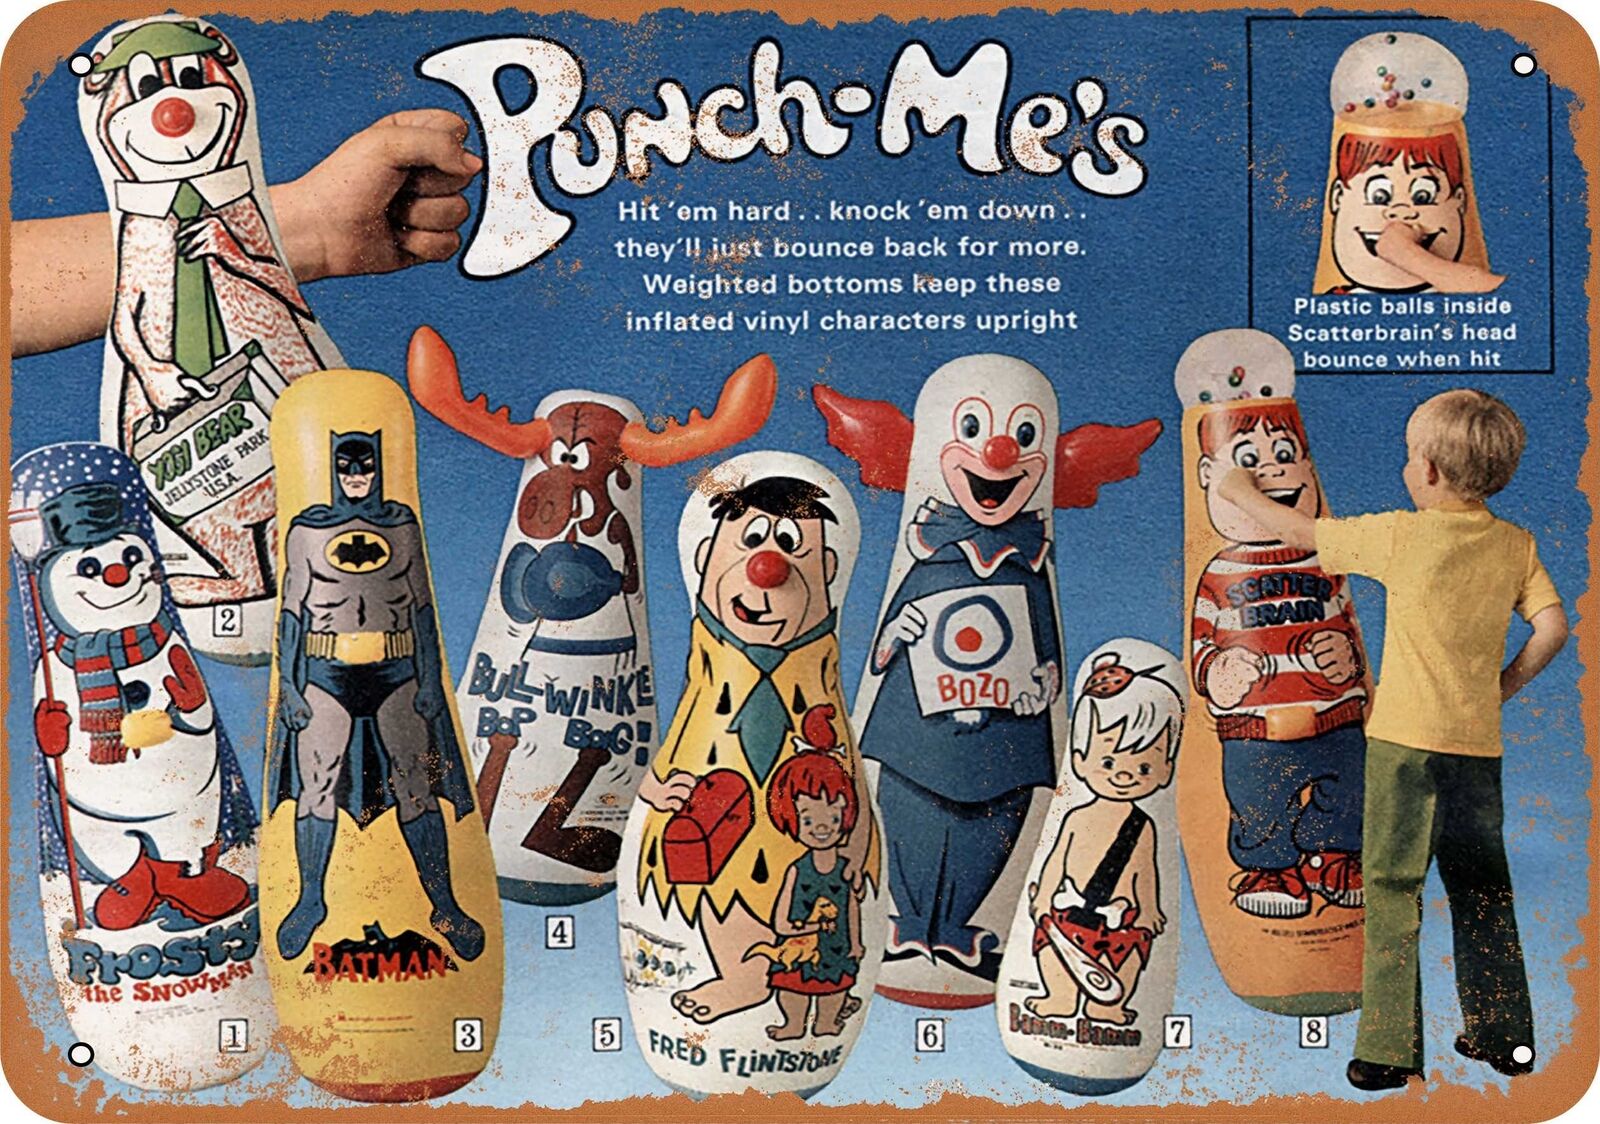 Metal Sign - 1971 Punch-Me Toys - Vintage Look Reproduction